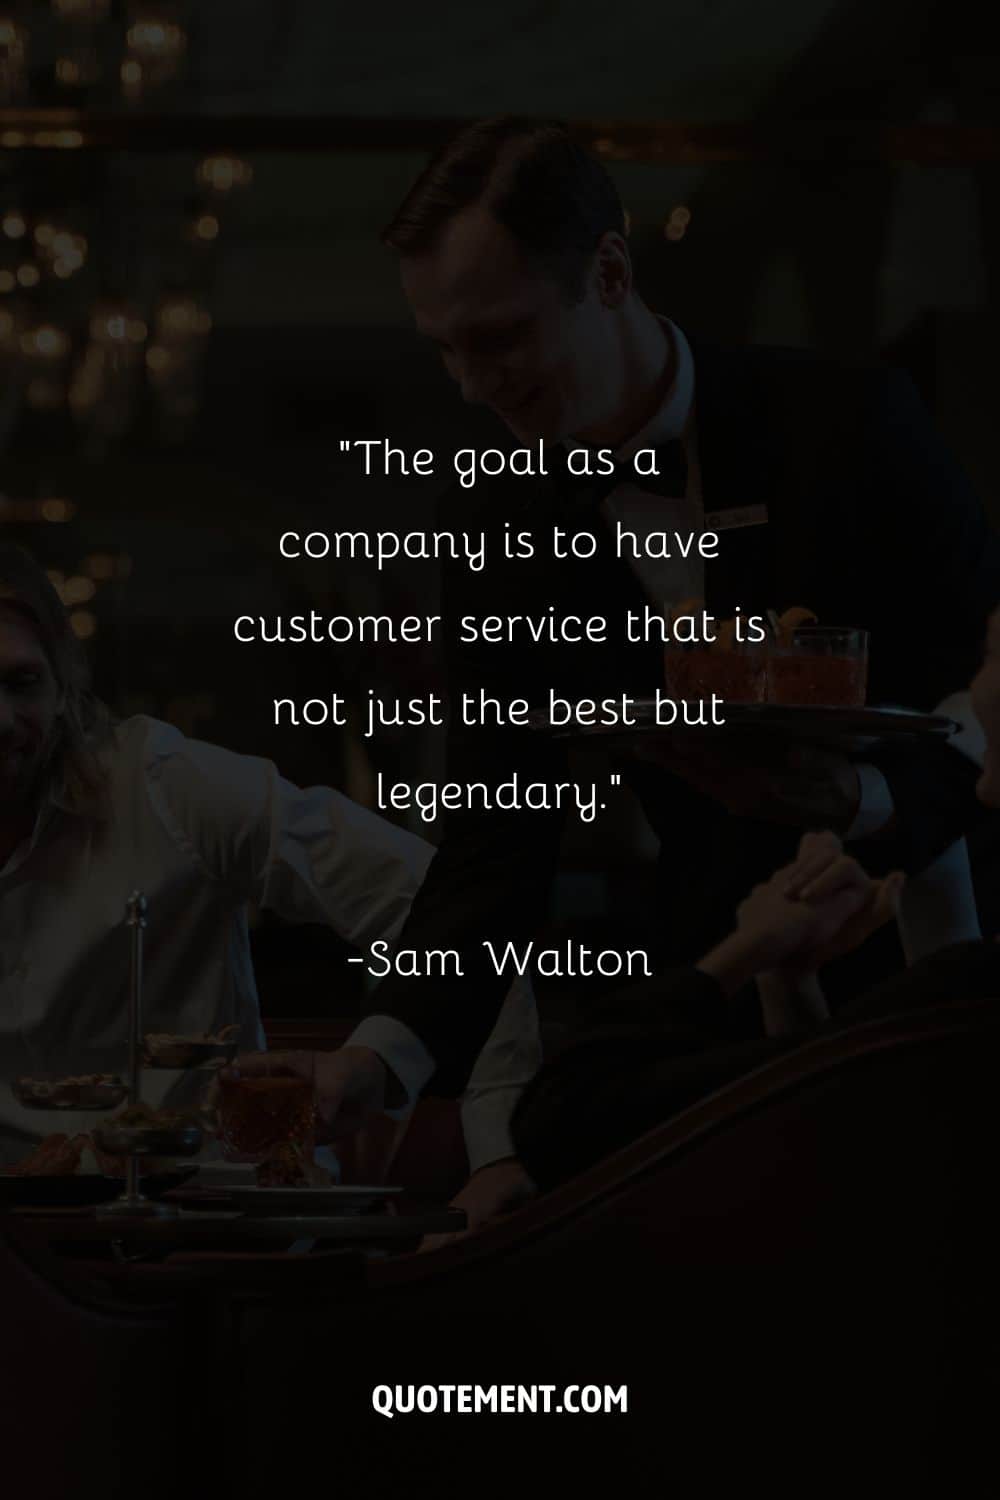 Image of a waiter serving people representing a good service quote.
